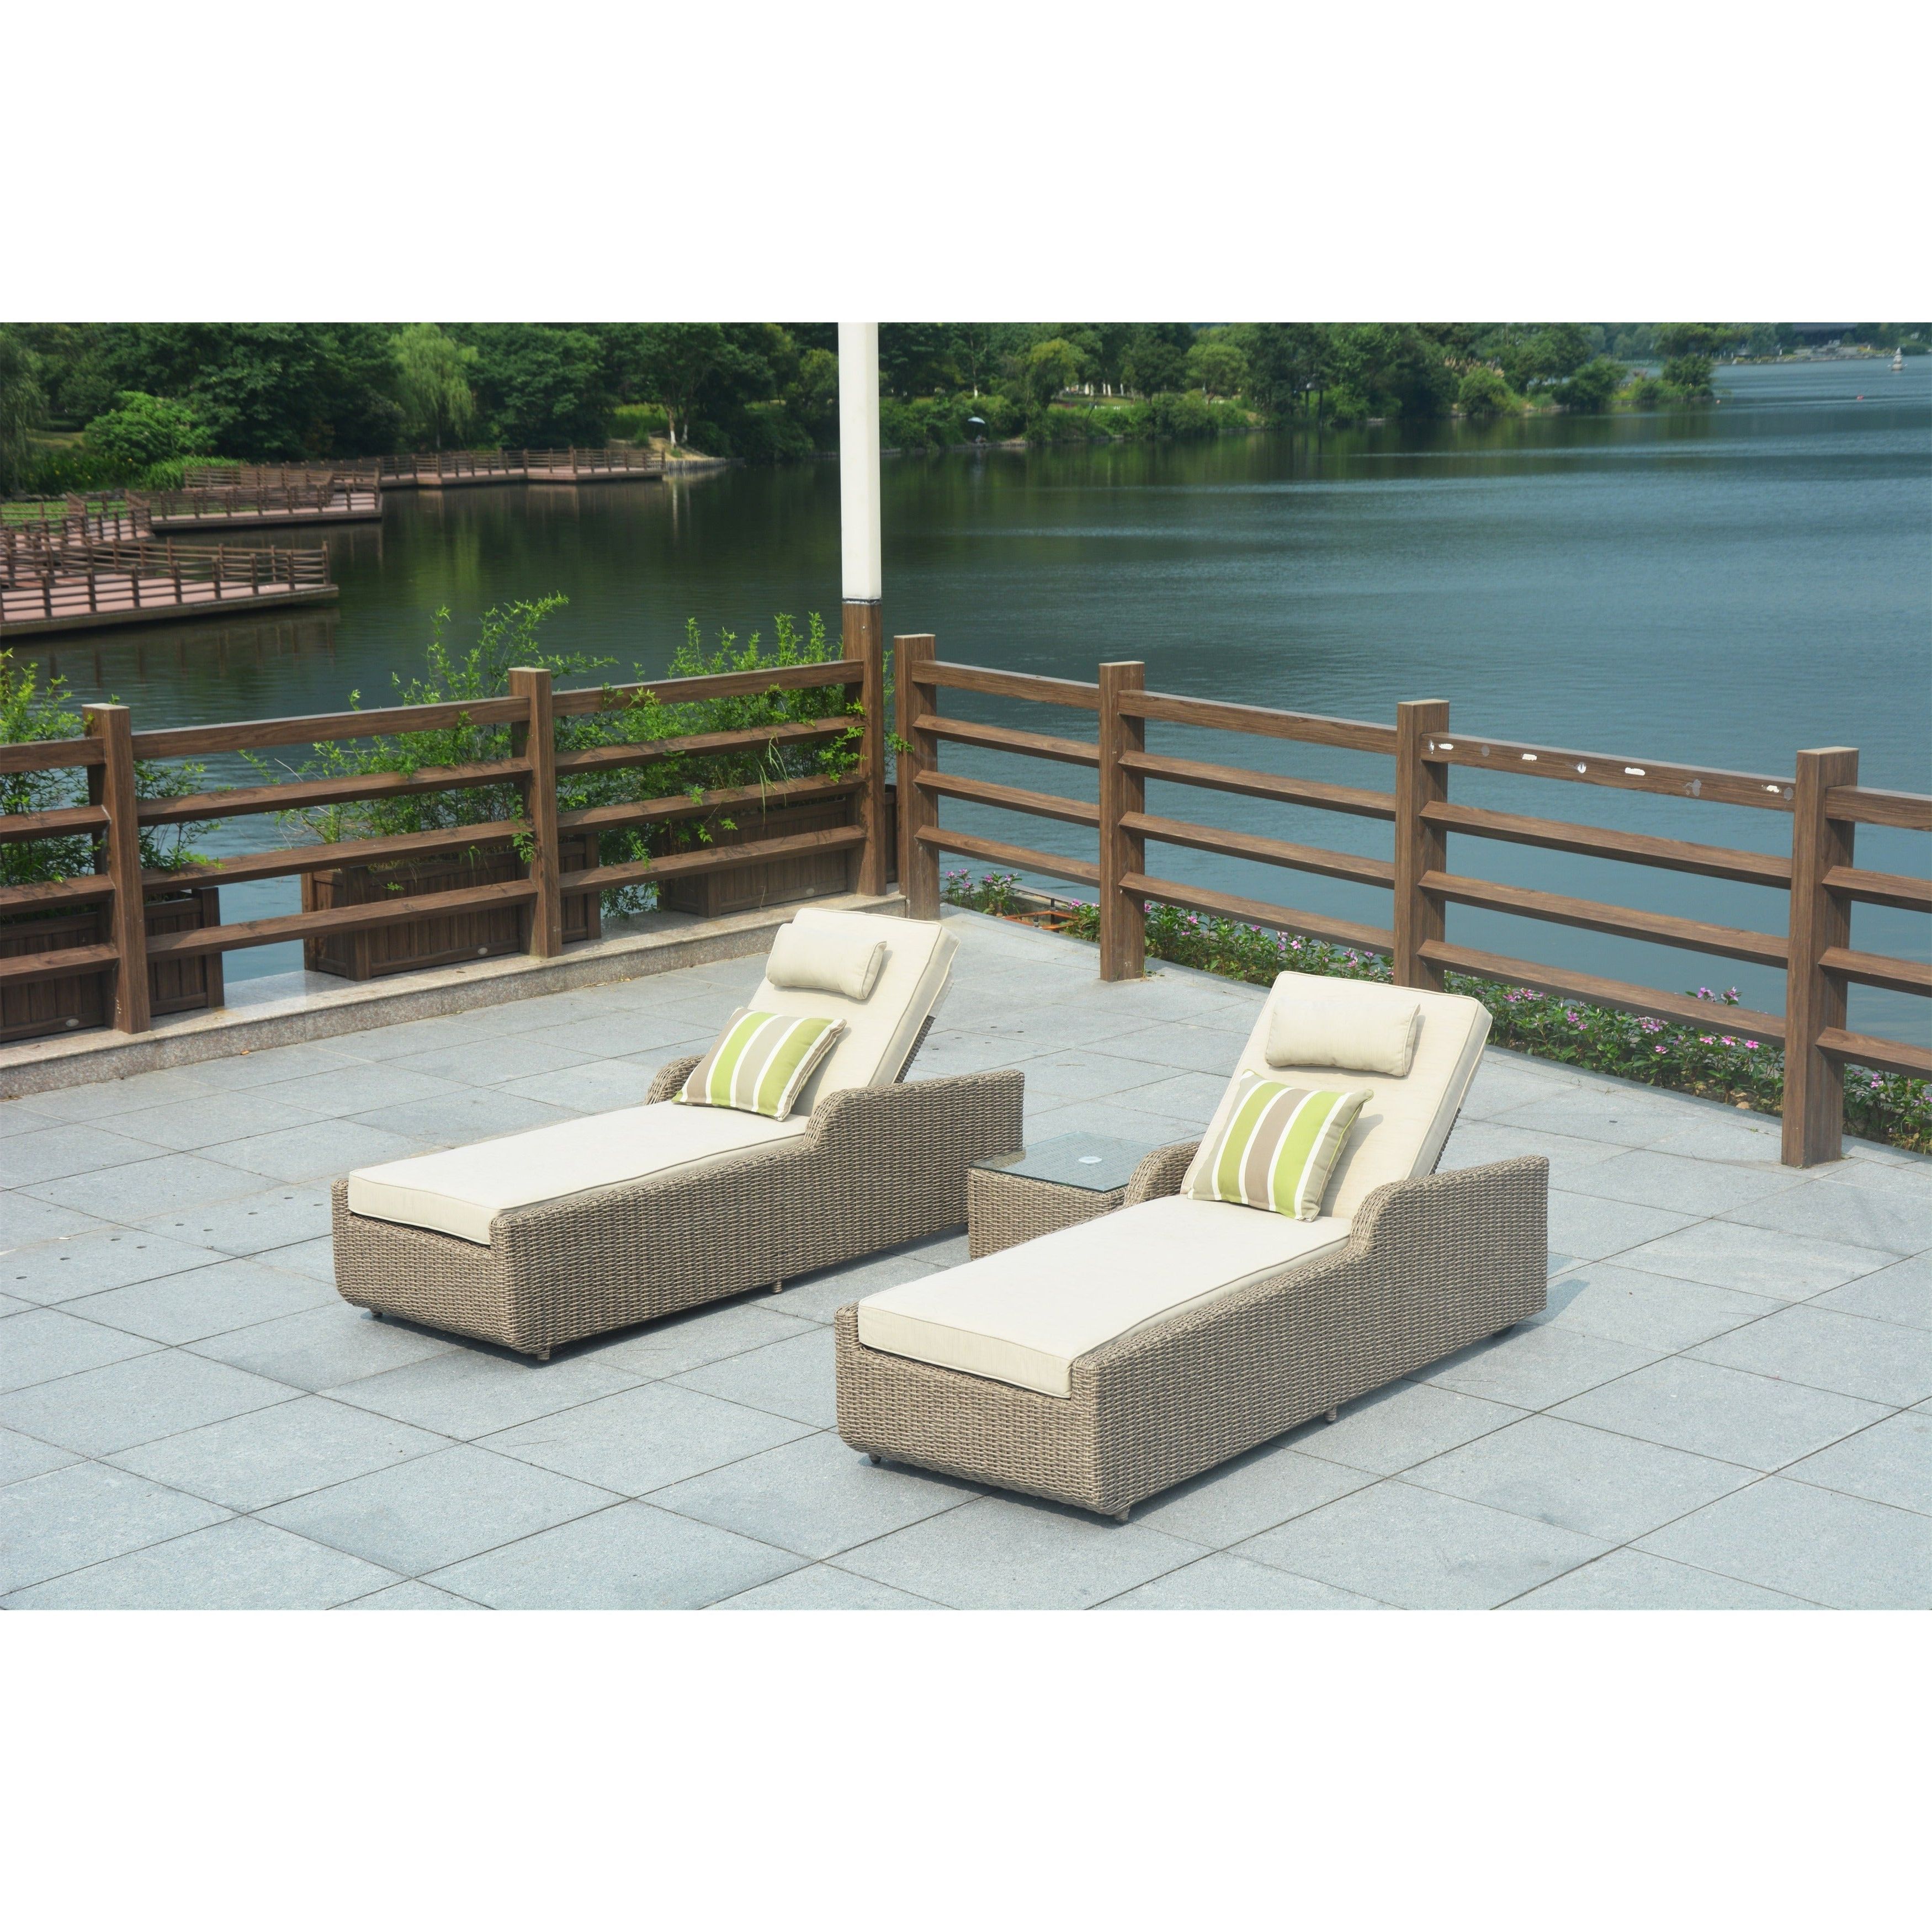 Alisa 3 Piece Natural Wicker All Weather Adjustable Patio Sun Loungers Set Throughout Favorite All Weather Single Outdoor Adjustable Loungers (View 3 of 25)